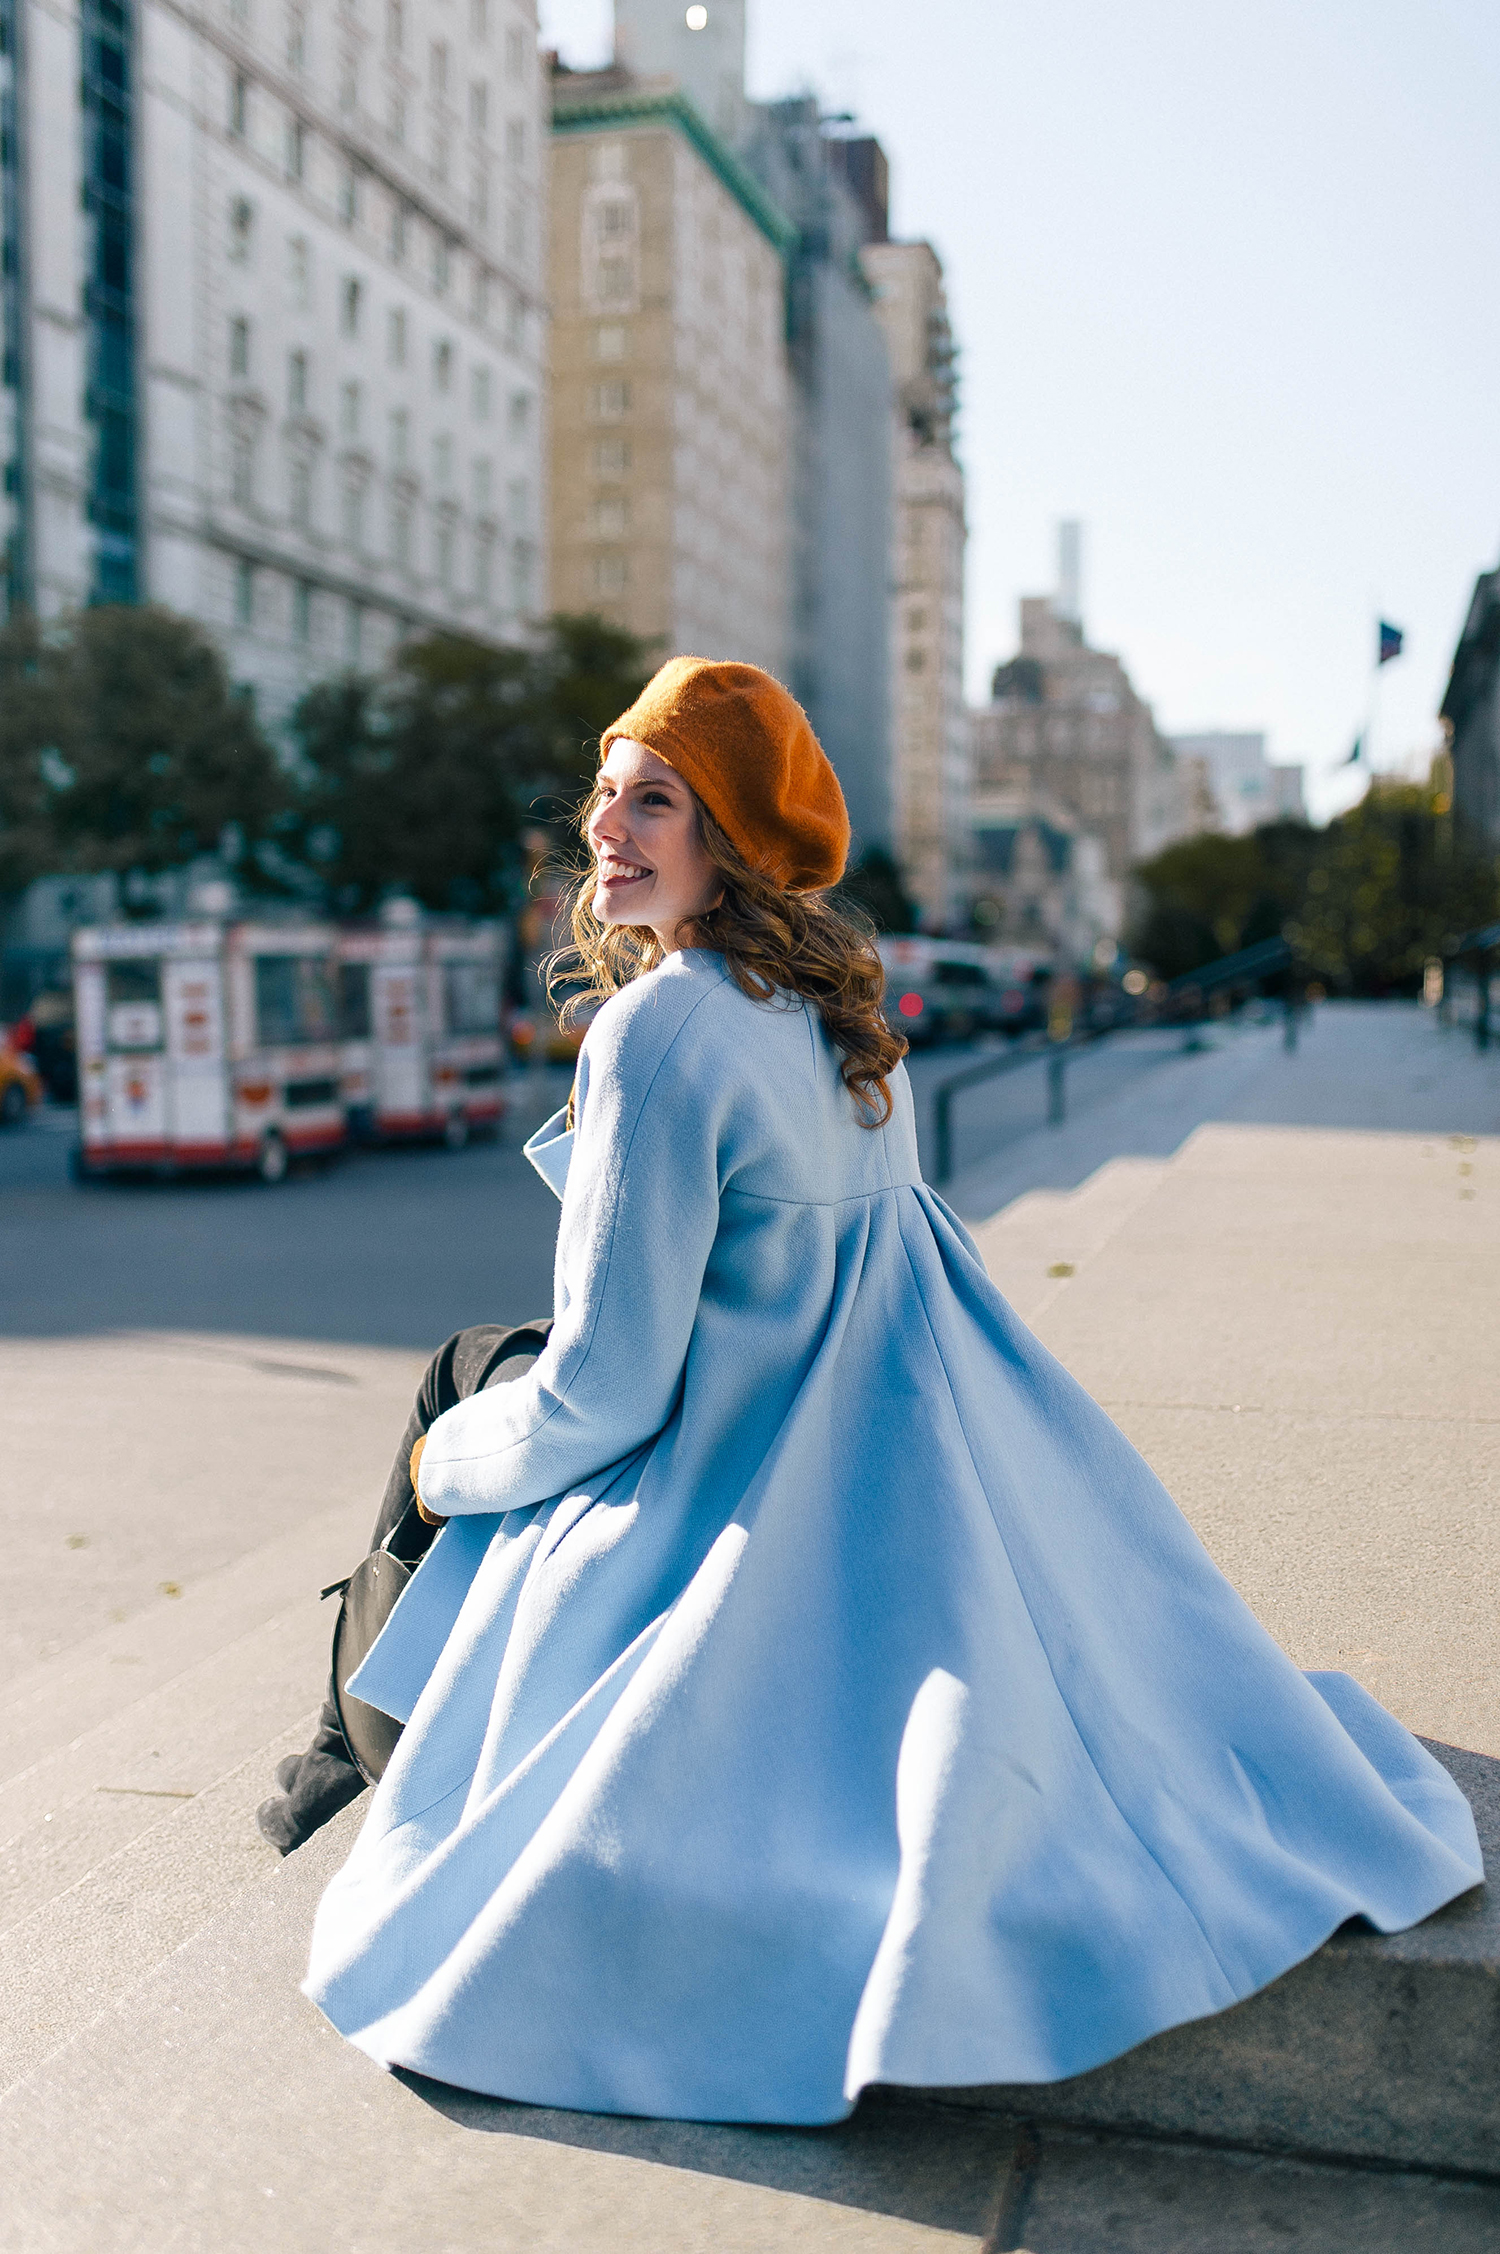 Alyssa Campanella of The A List blog in a Downton Abbey inspired look in New York